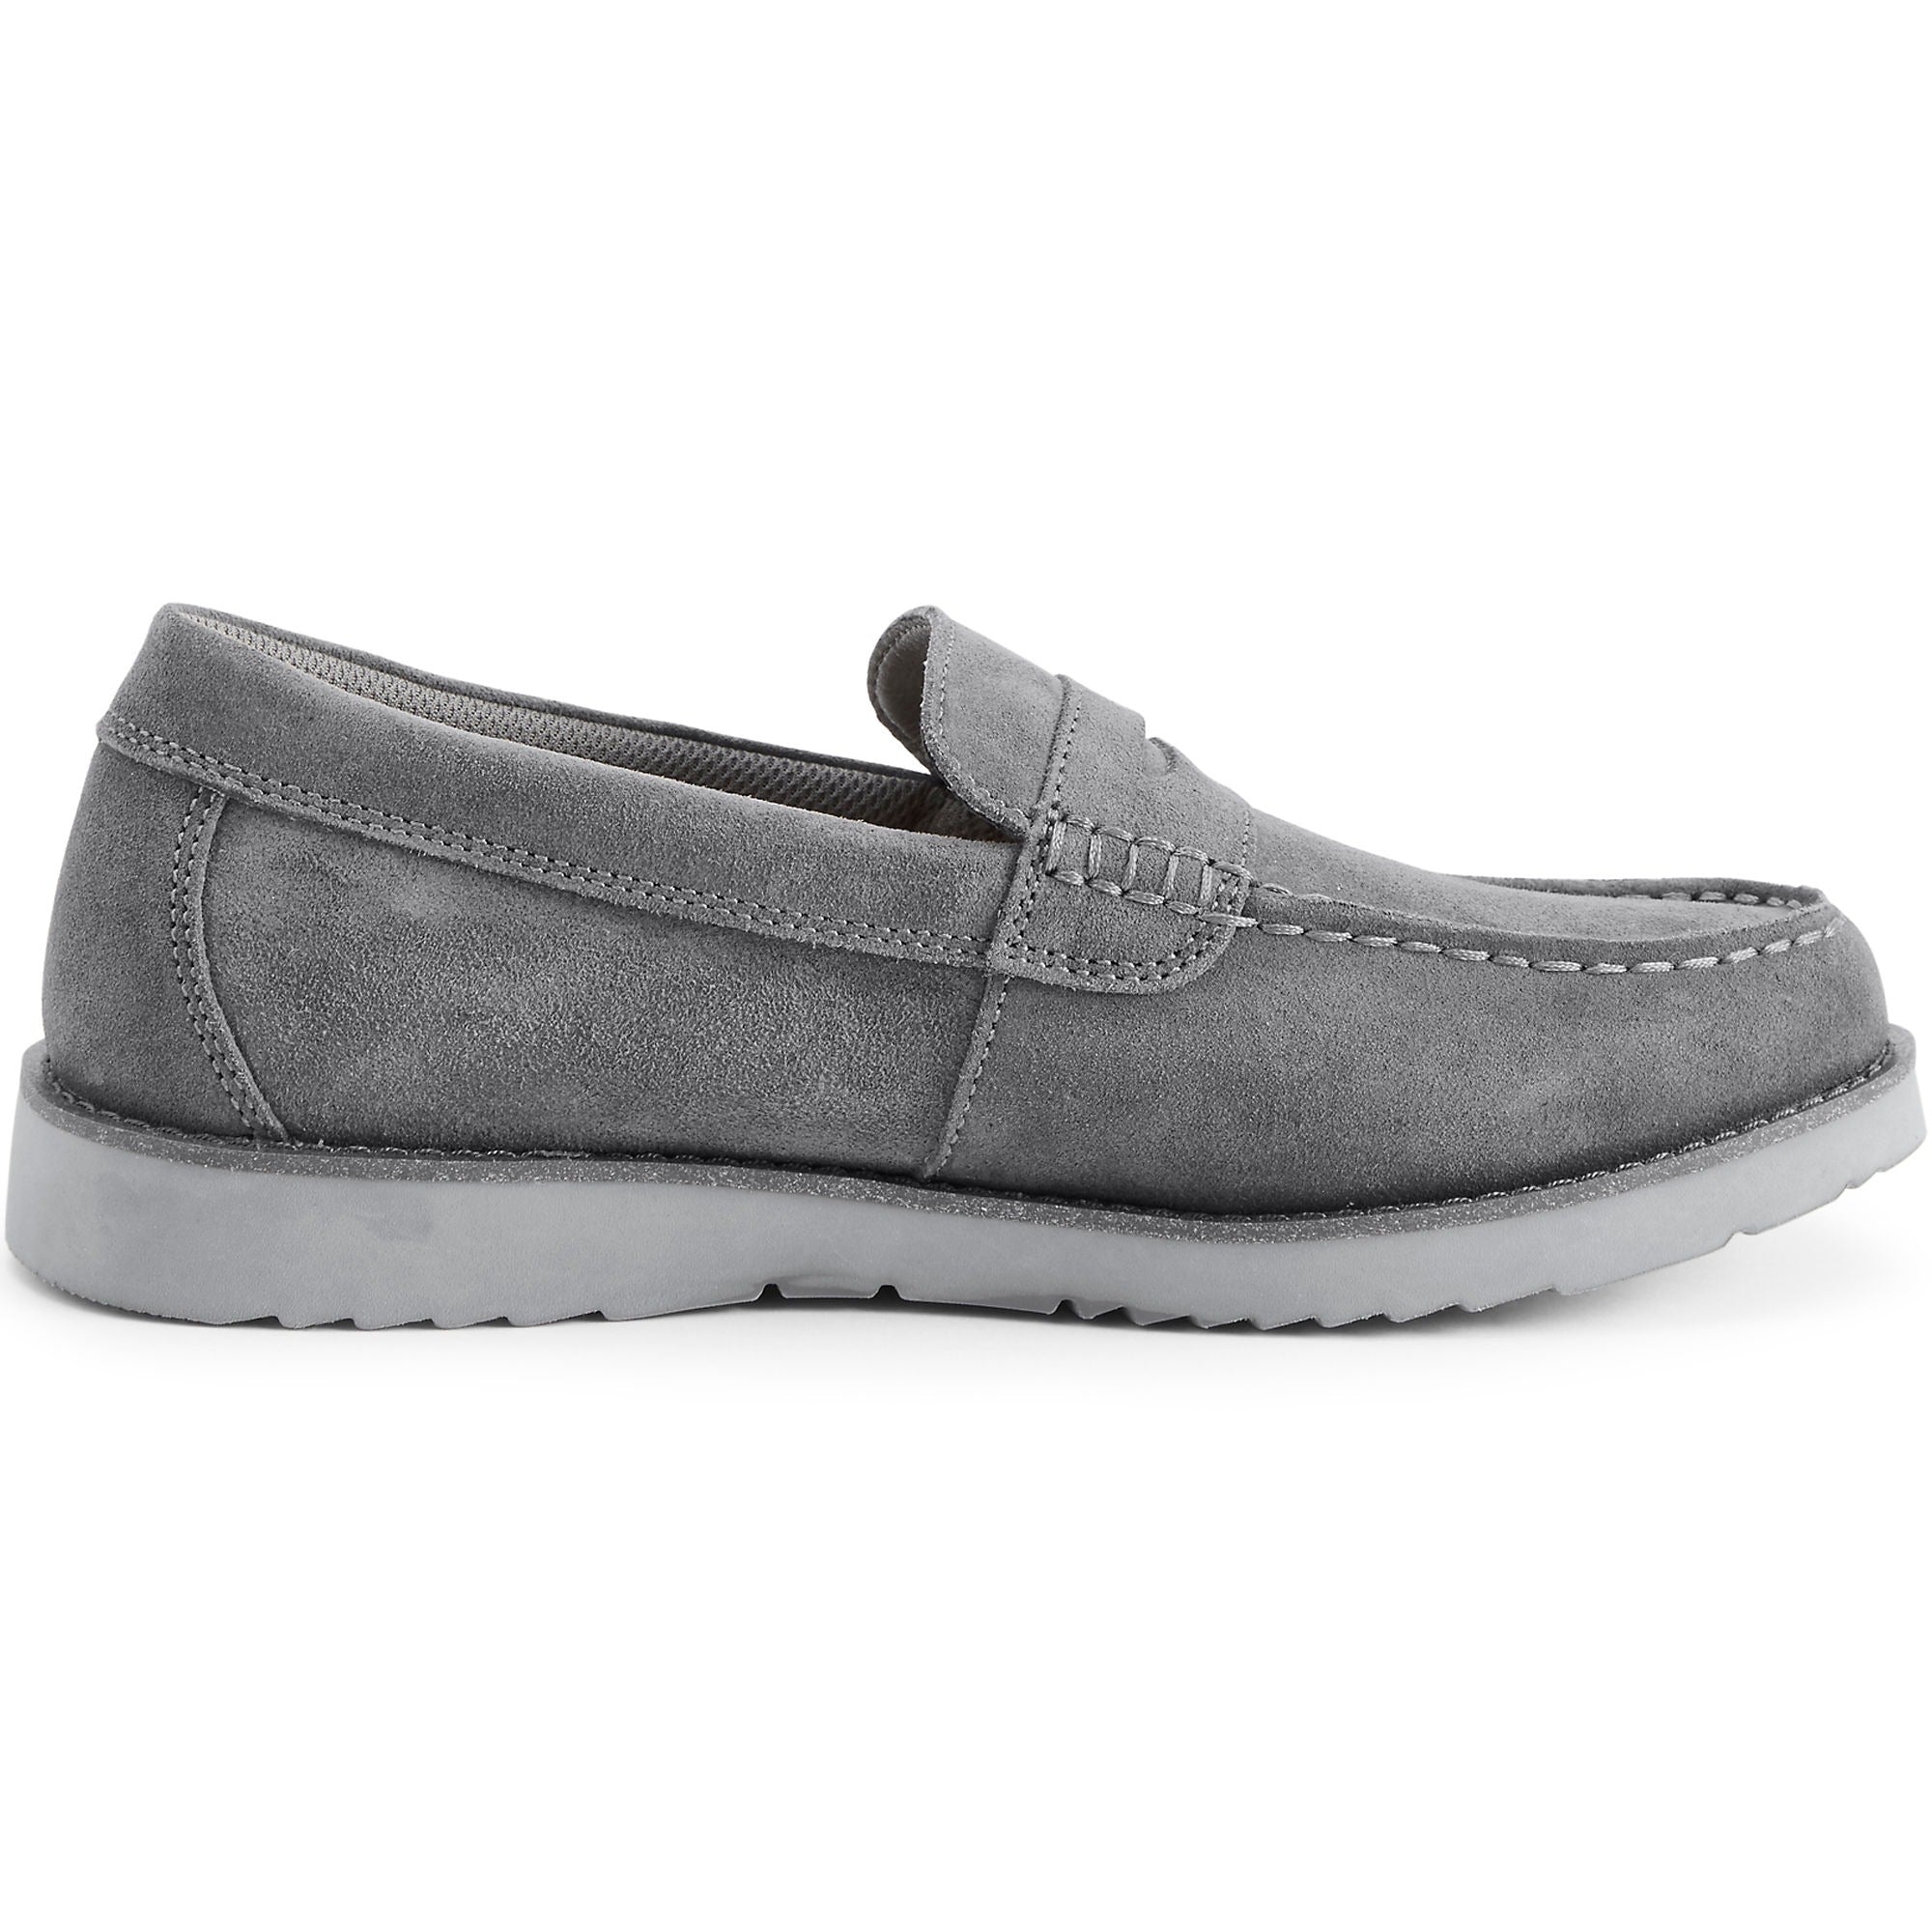 Lands' End Men's Comfort Casual Suede Penny Loafers 520215